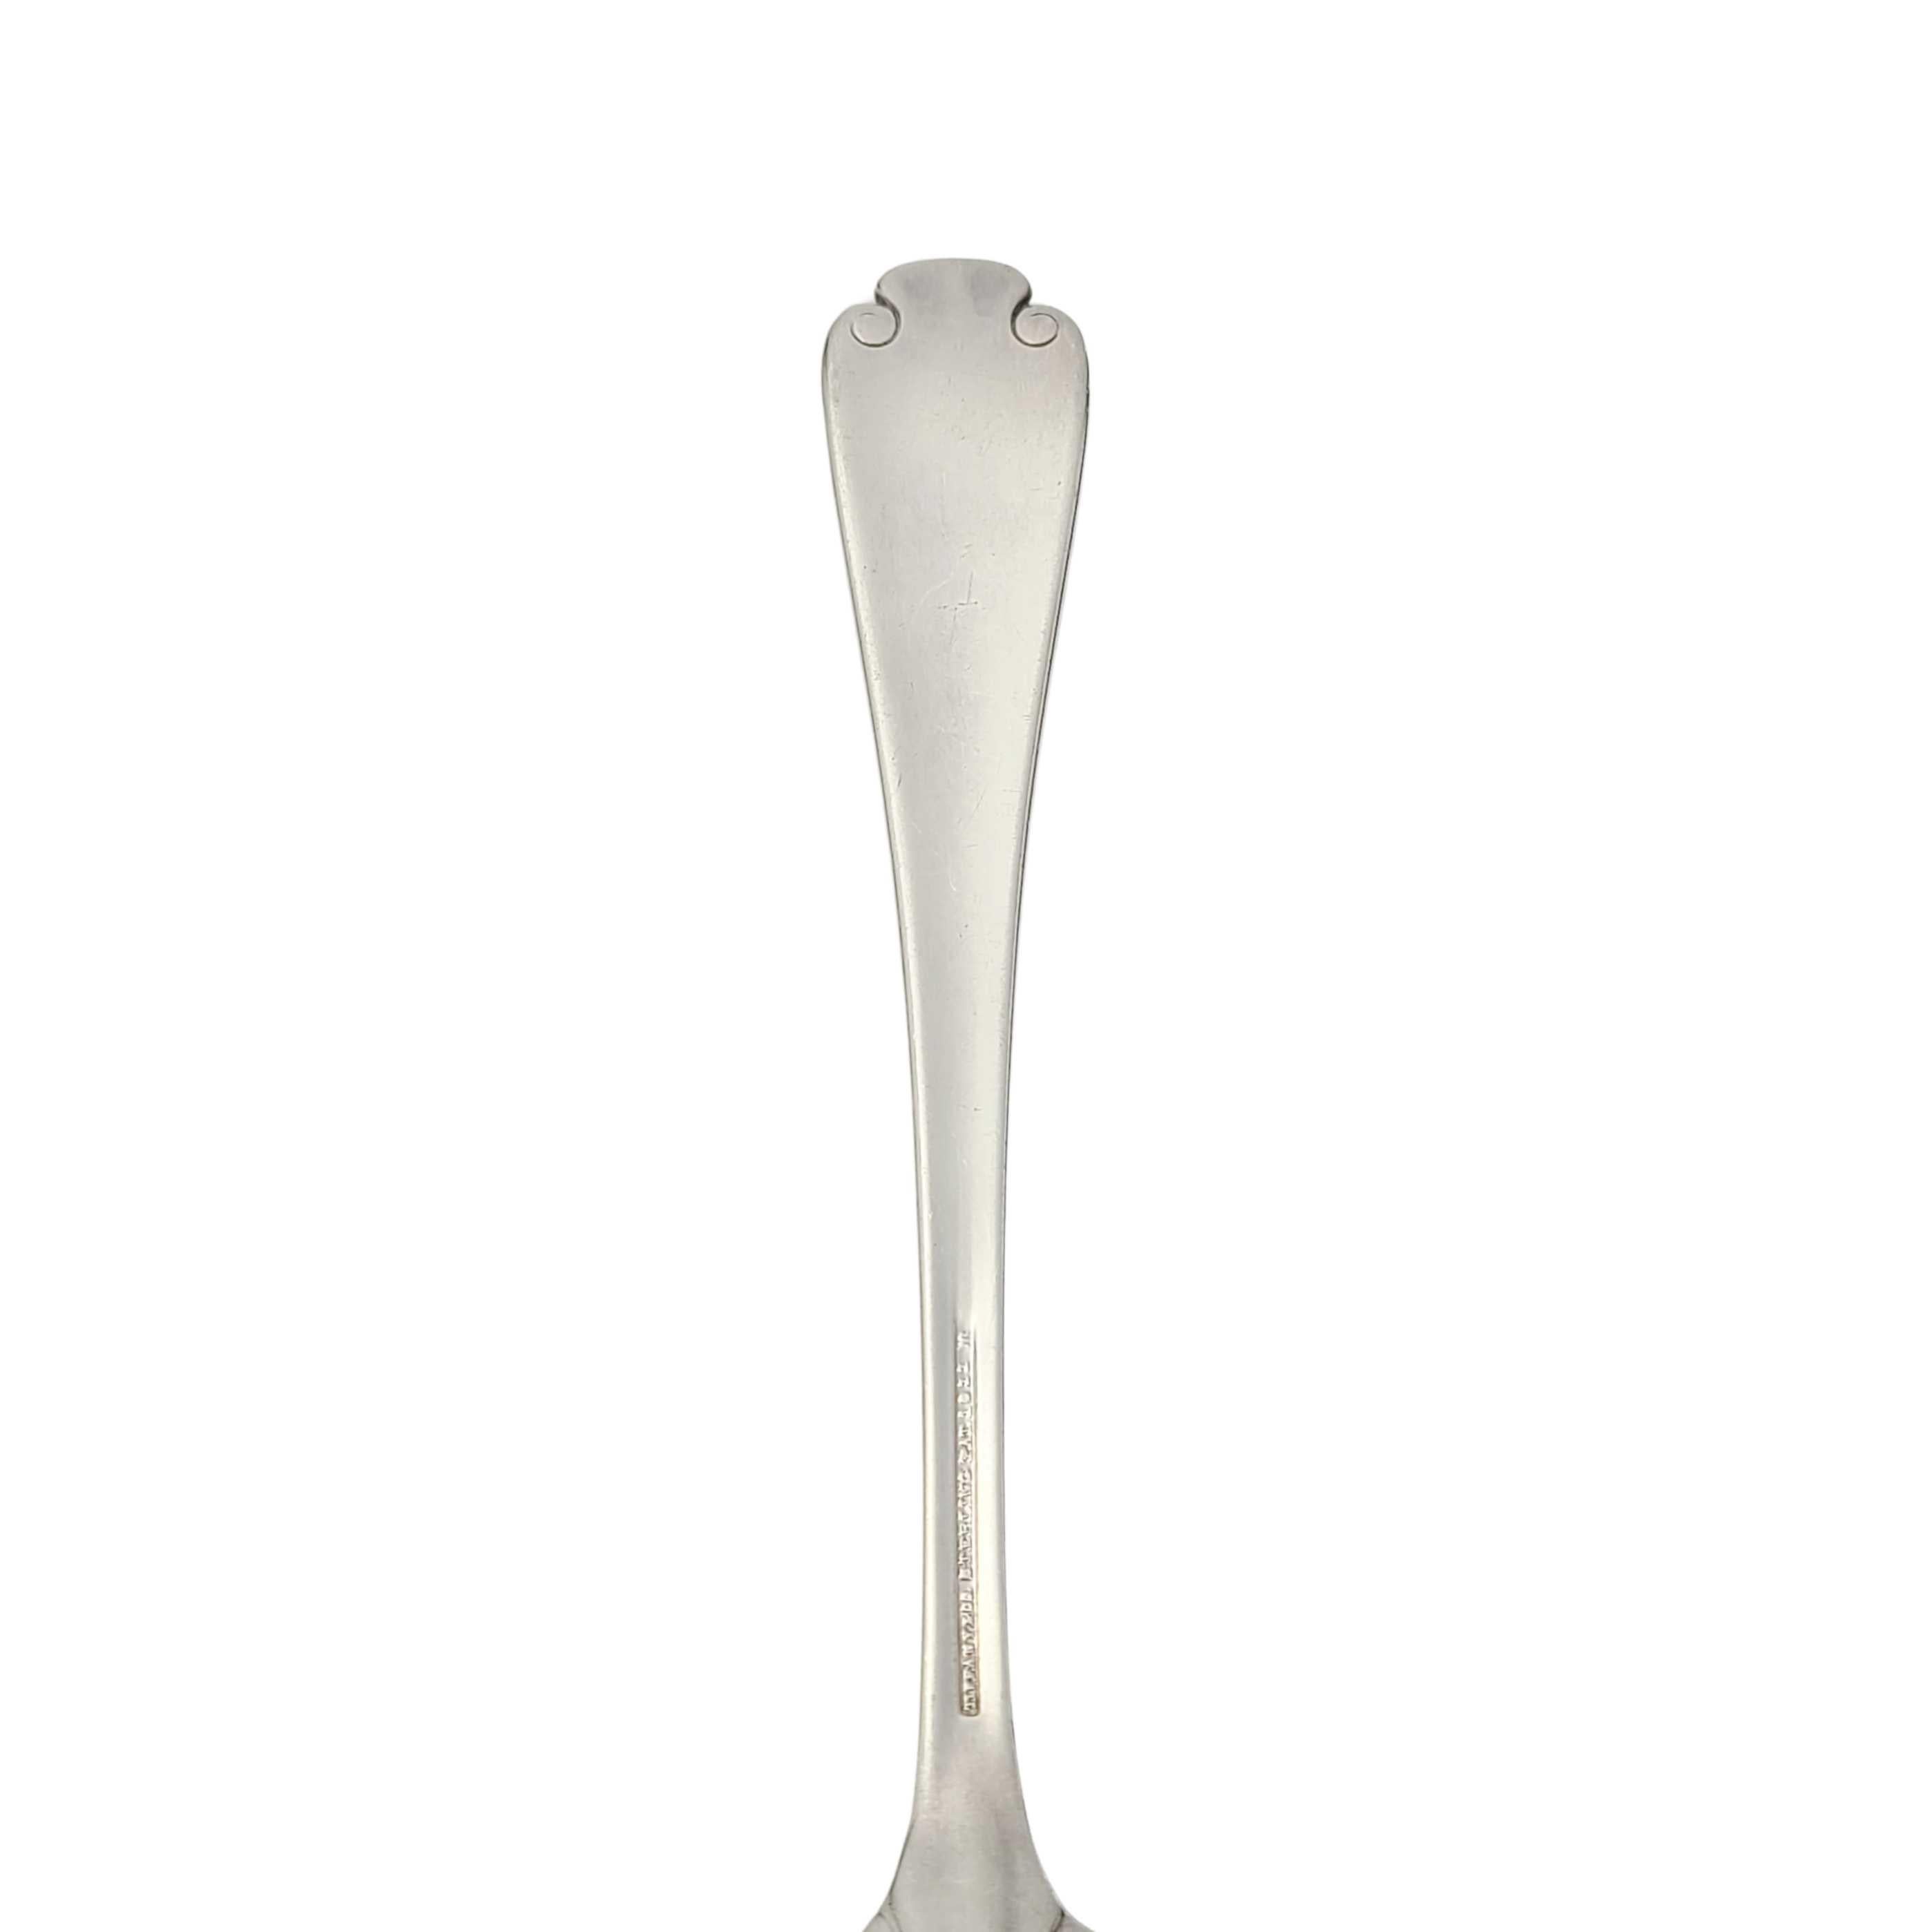 Tiffany & Co Flemish Sterling Silver Pierced Tomato Server with Monogram 1